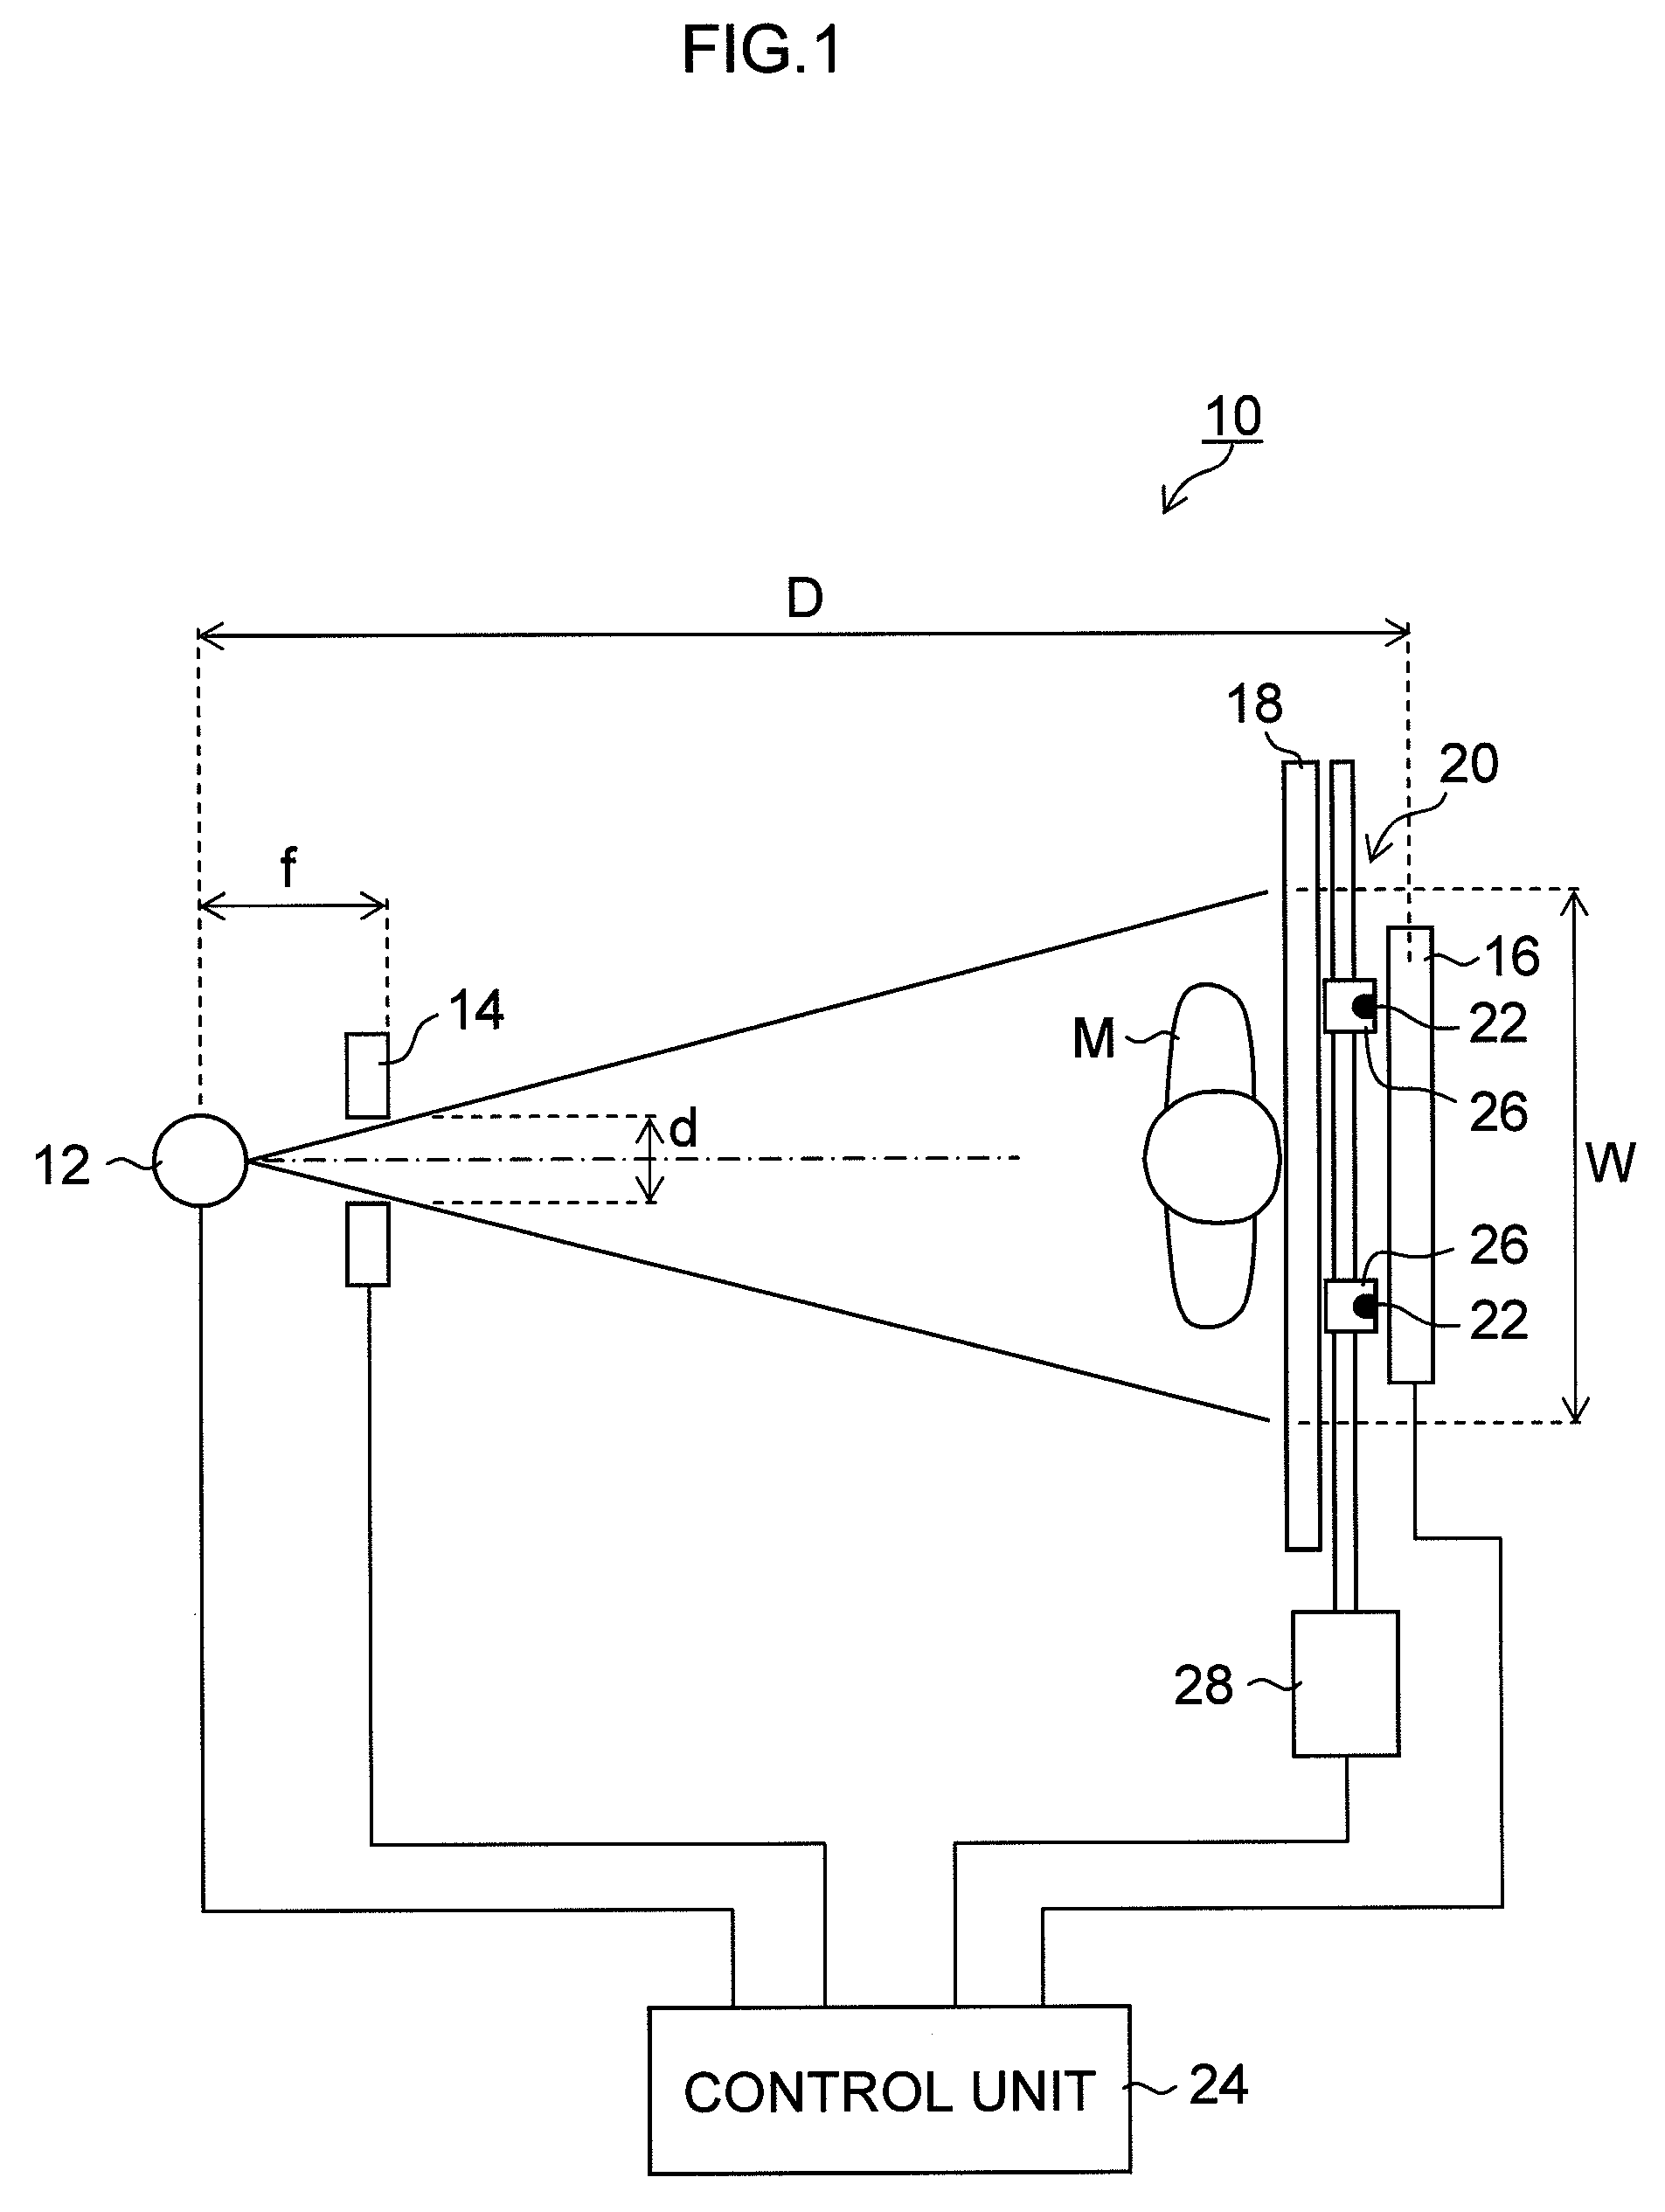 Imaging support device for radiographic long length imaging